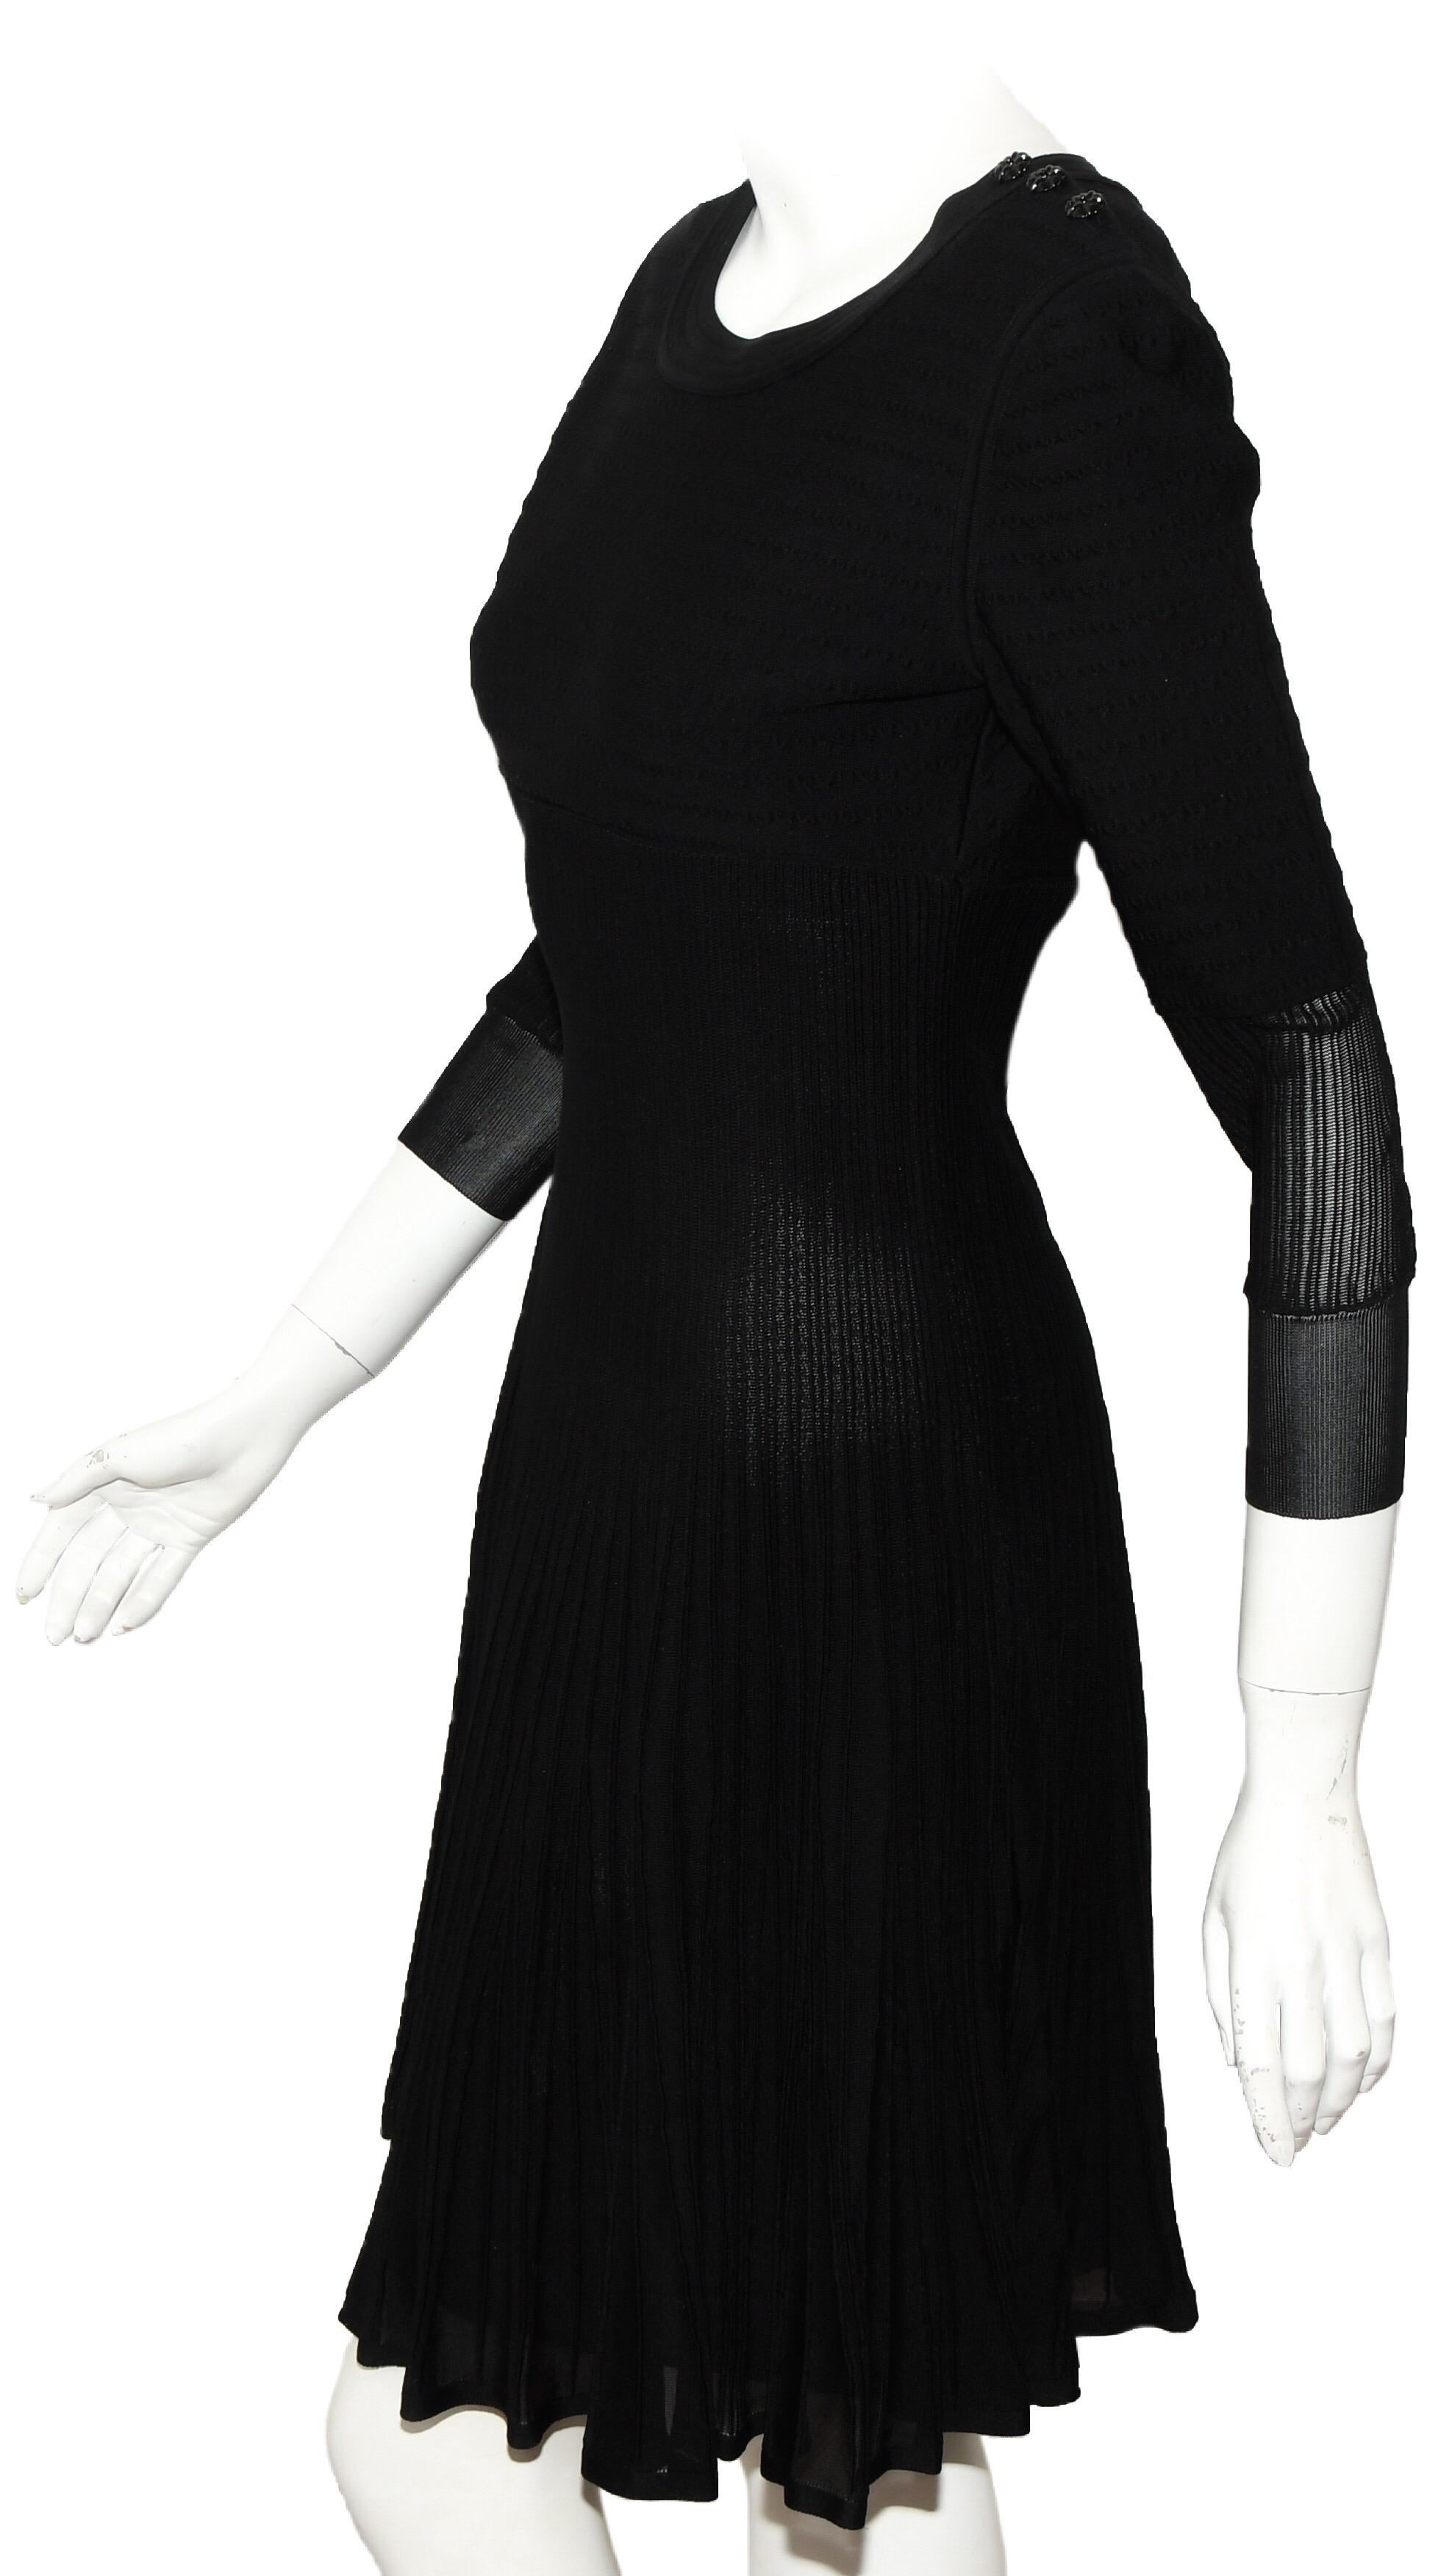 Chanel black knit silk blend dress from the 2009 cruise collection is a show stopper with stretch silk and viscose on the upper torso then transitioning to silk ribbed pleats and flaring to a full skirt.   The sleeves have the same composition as